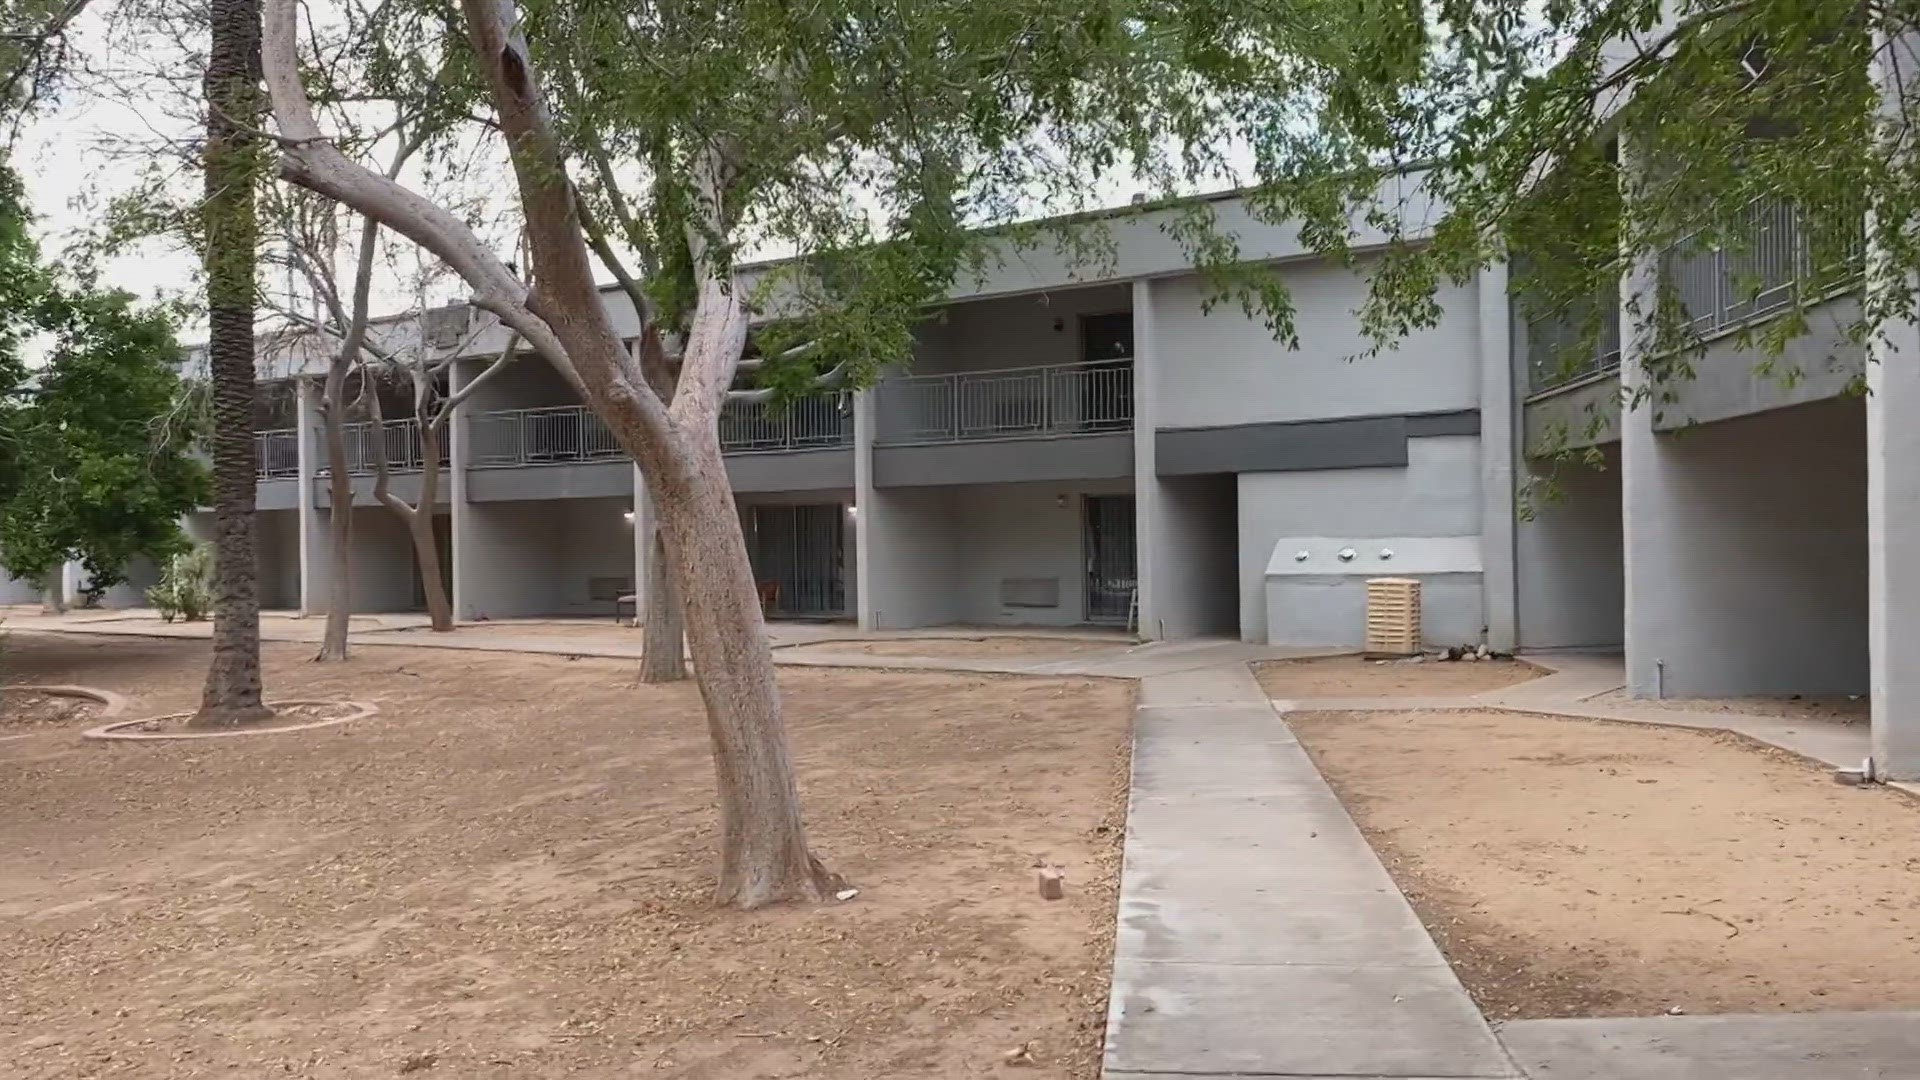 The City of Mesa is proposing to move its Off the Streets program from the Windermere Hotel to the Grand Hotel.